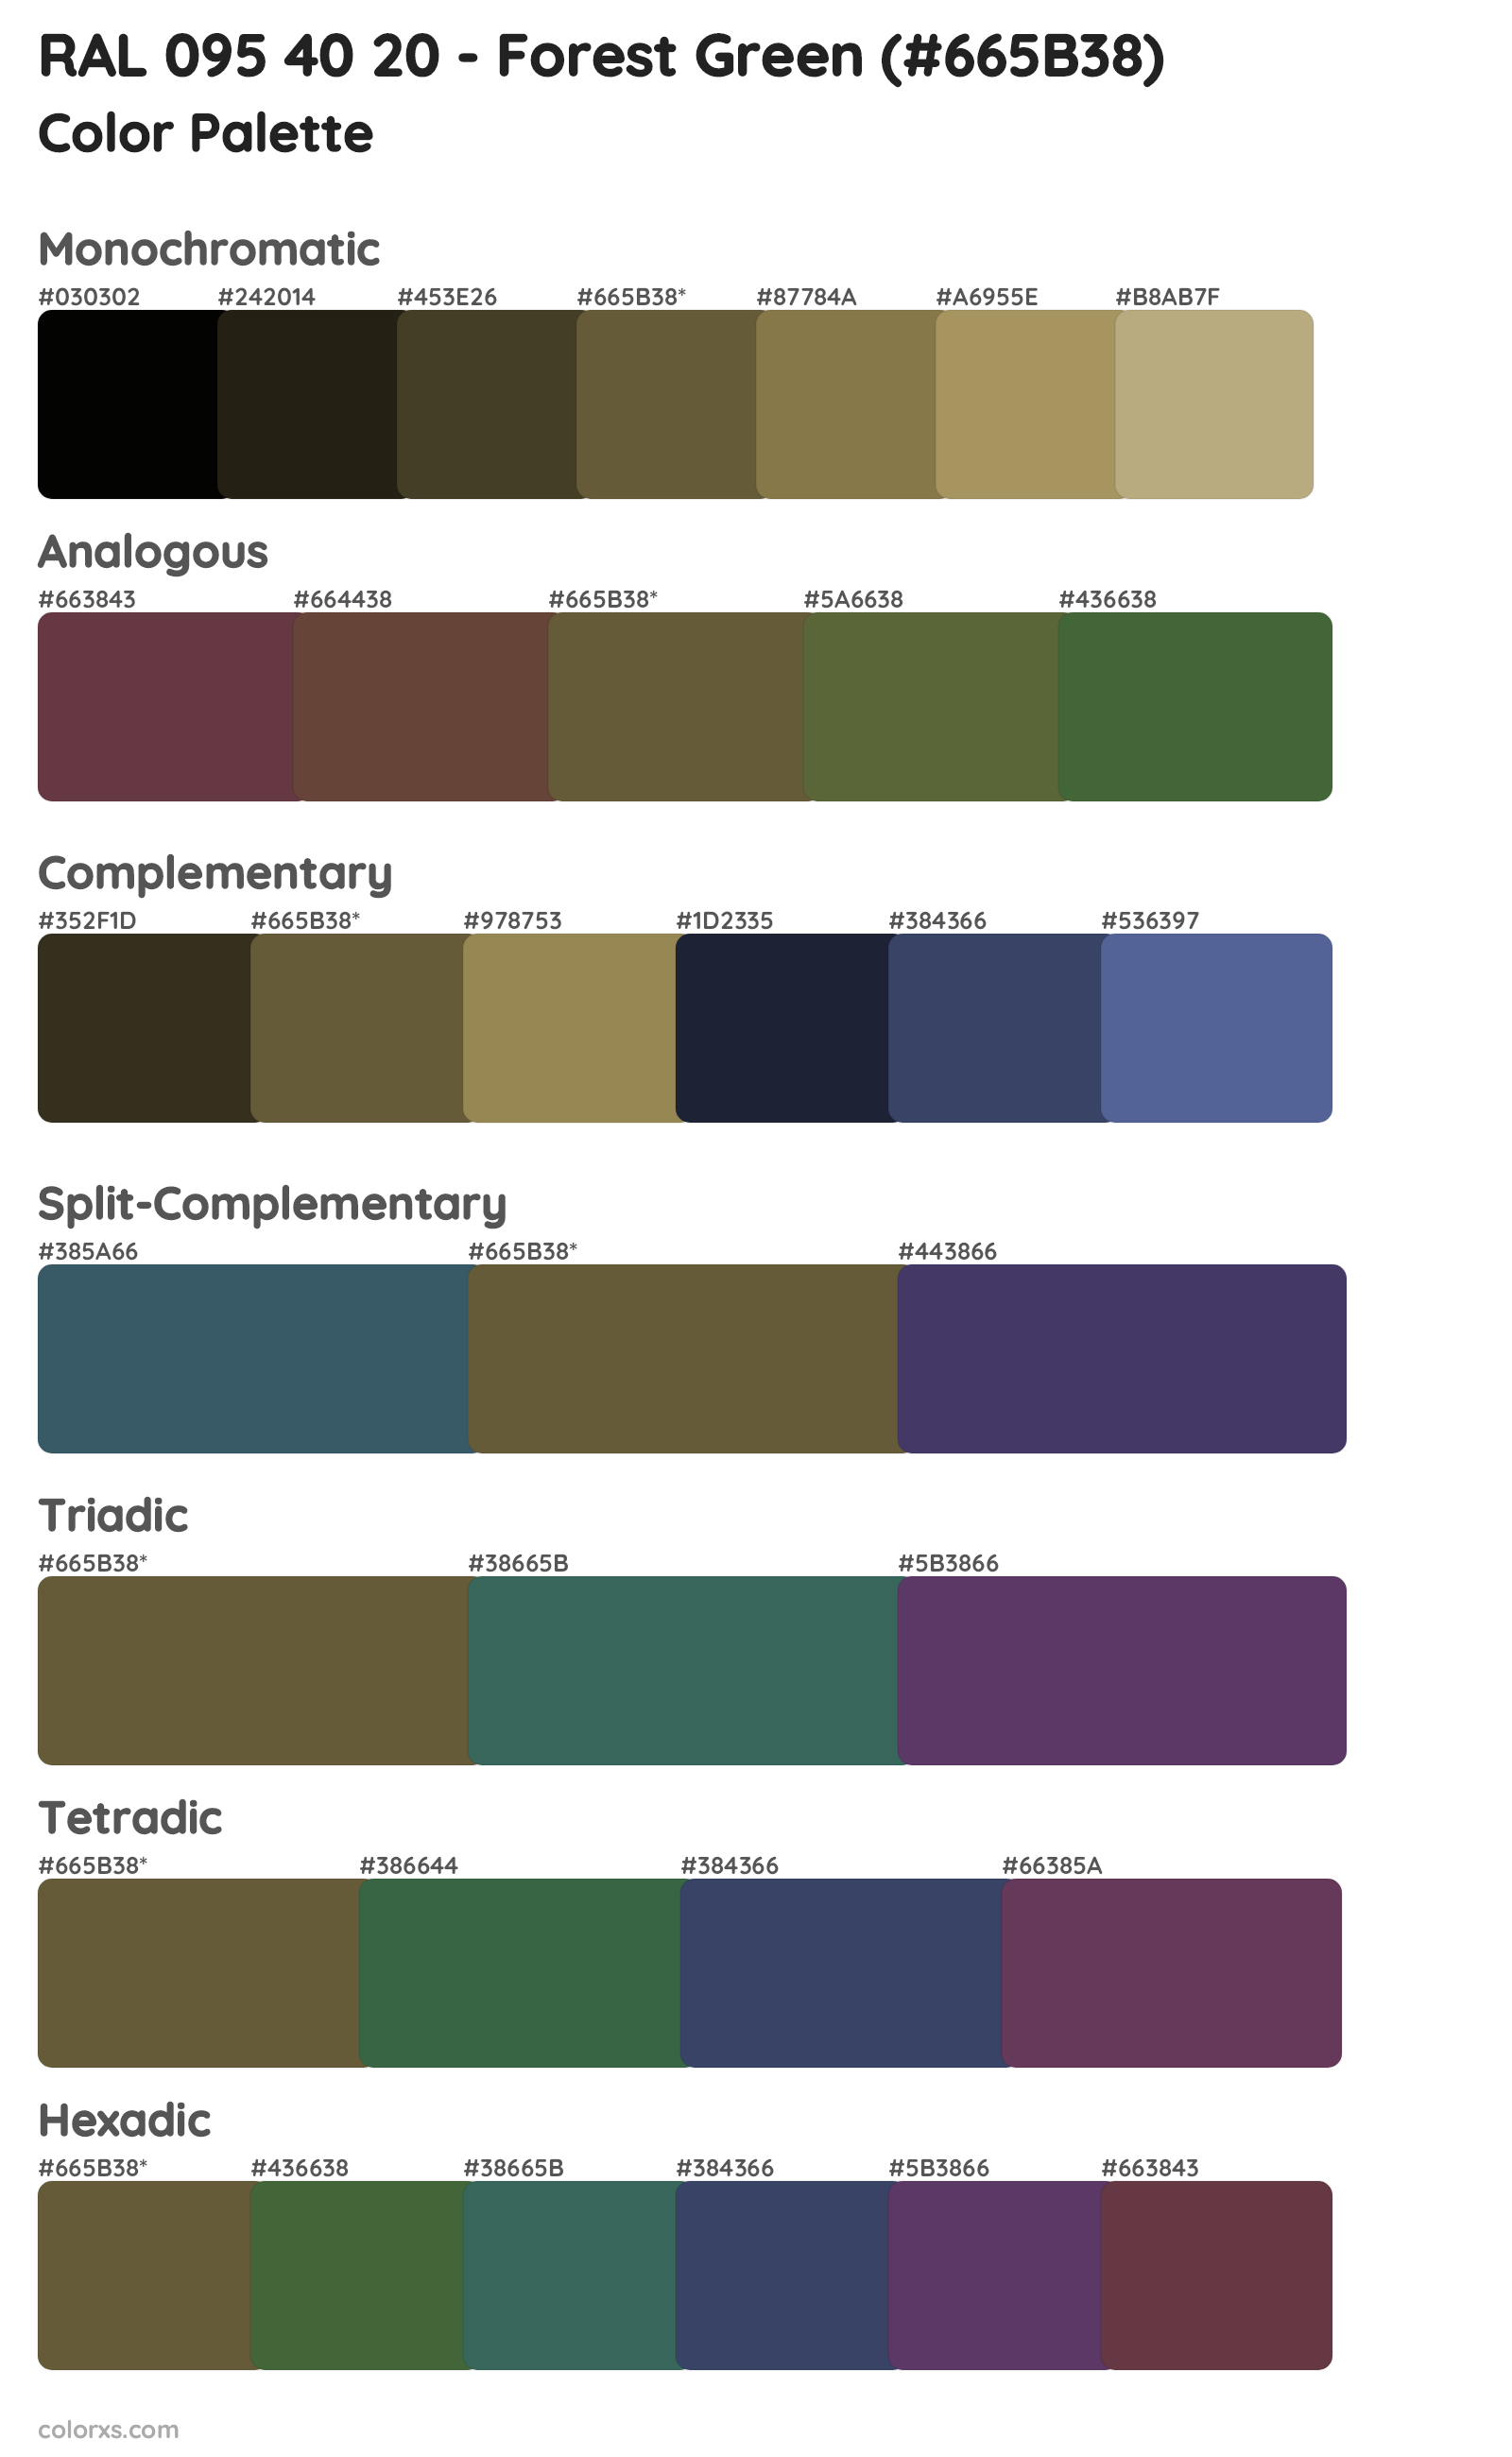 RAL 095 40 20 - Forest Green Color Scheme Palettes